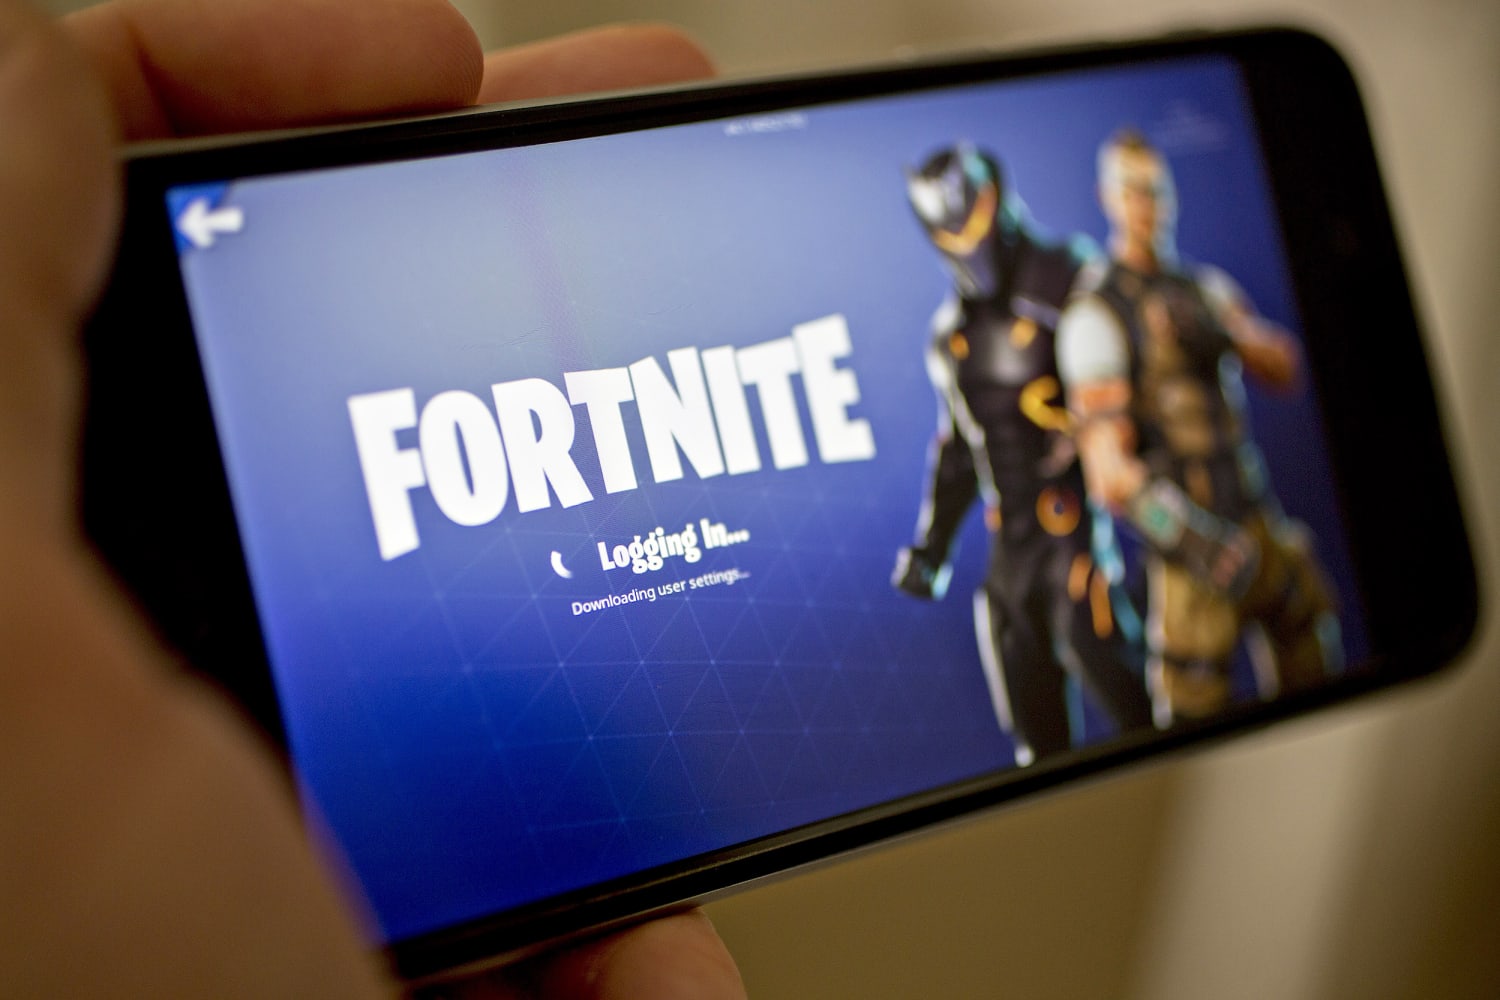 Fortnite Mobile download - Epic Games sends out Friend Invites on iOS, Gaming, Entertainment